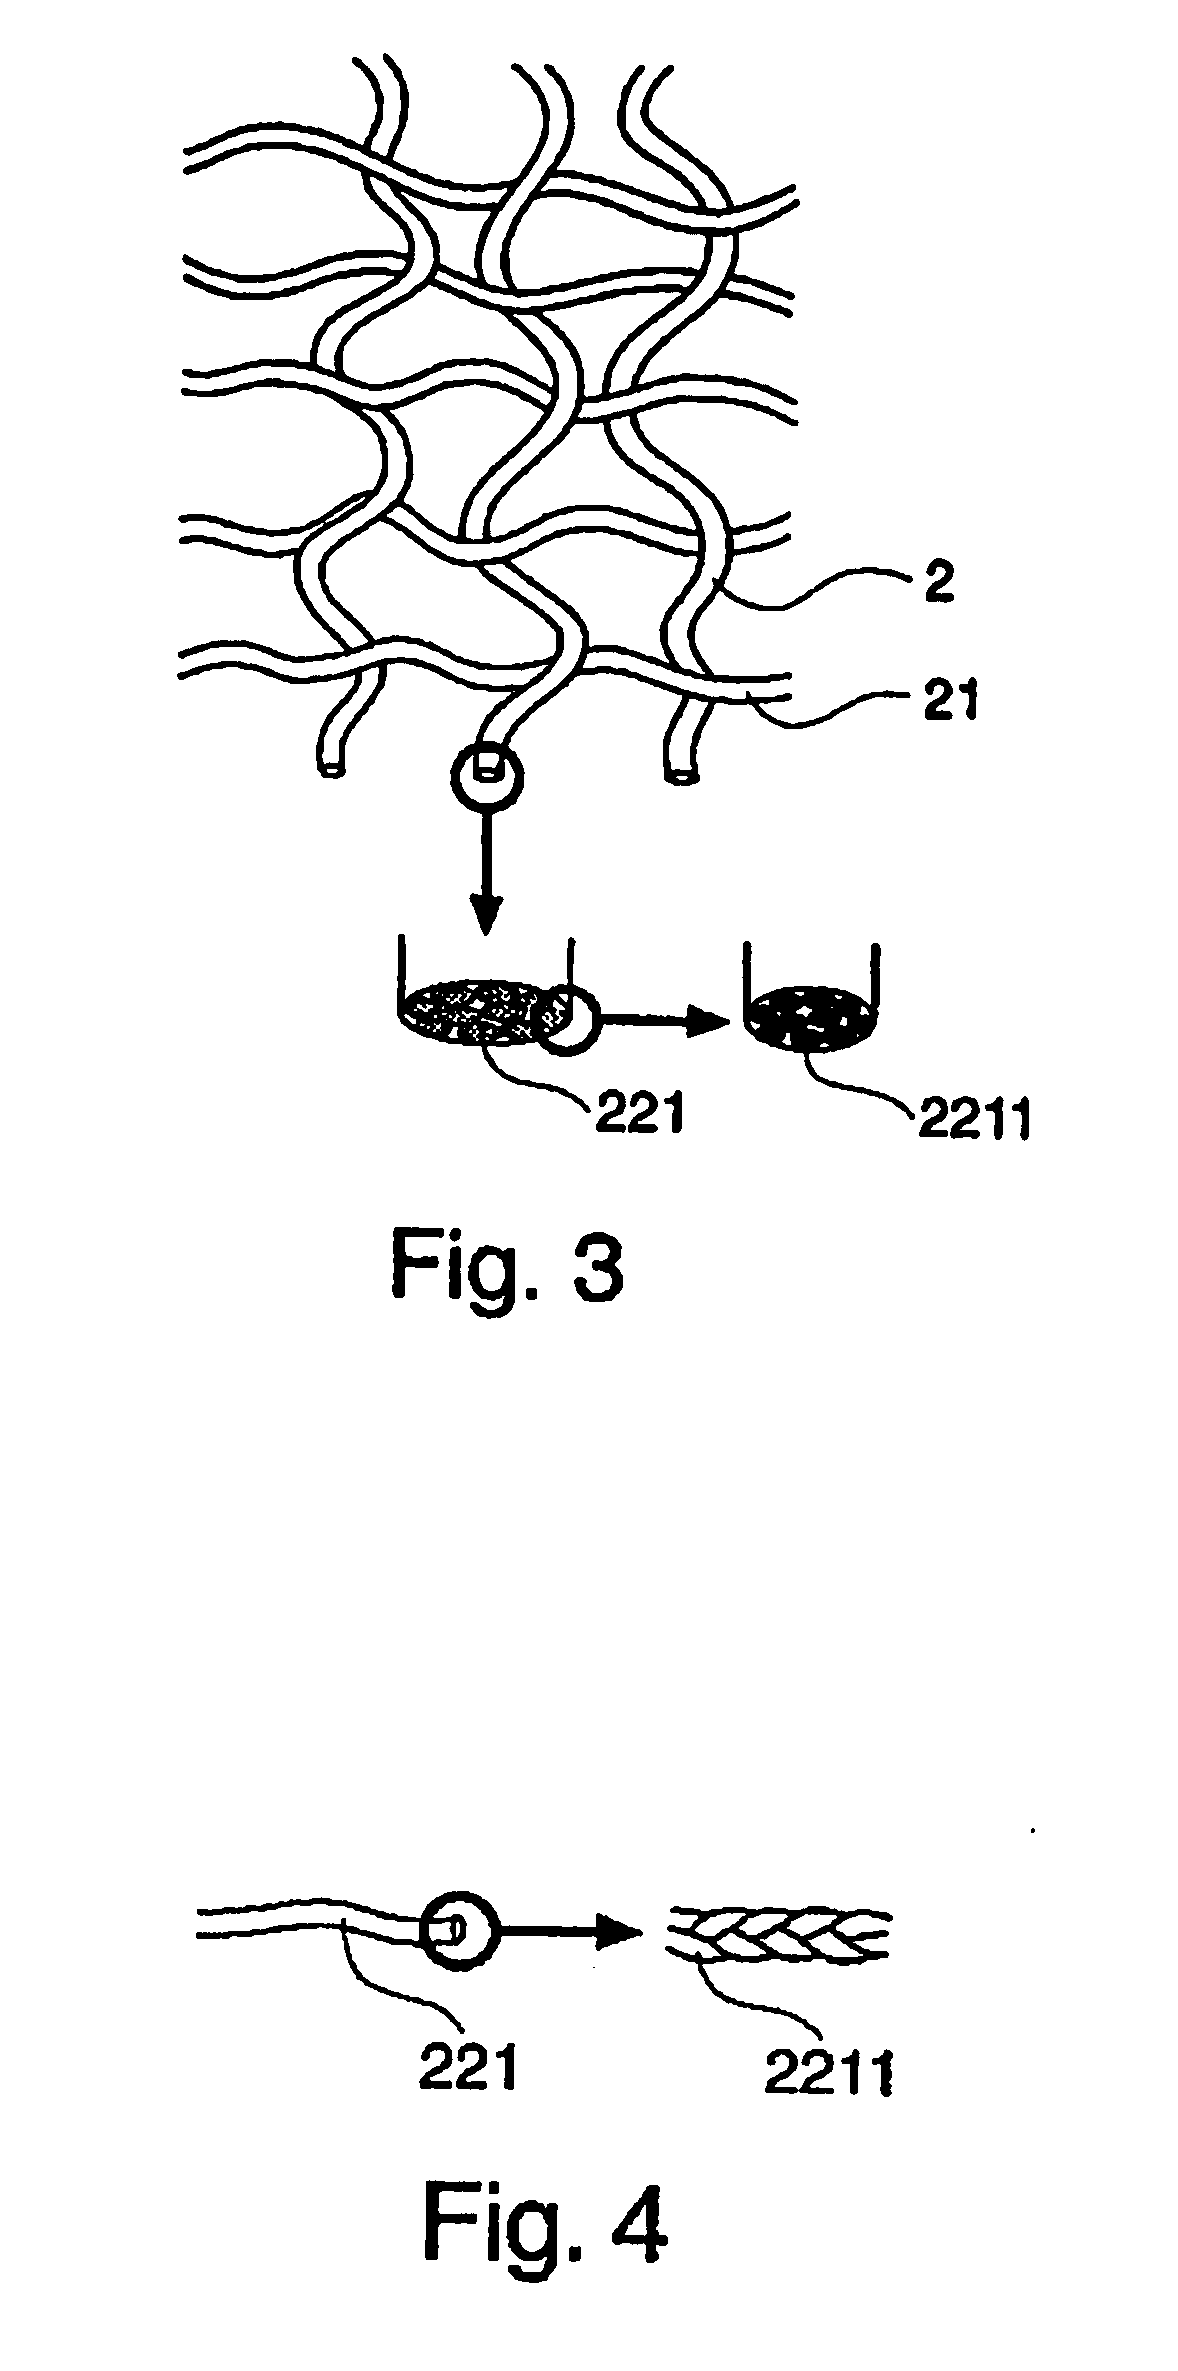 Synthetic, bioabsorbable polymer materials and implants